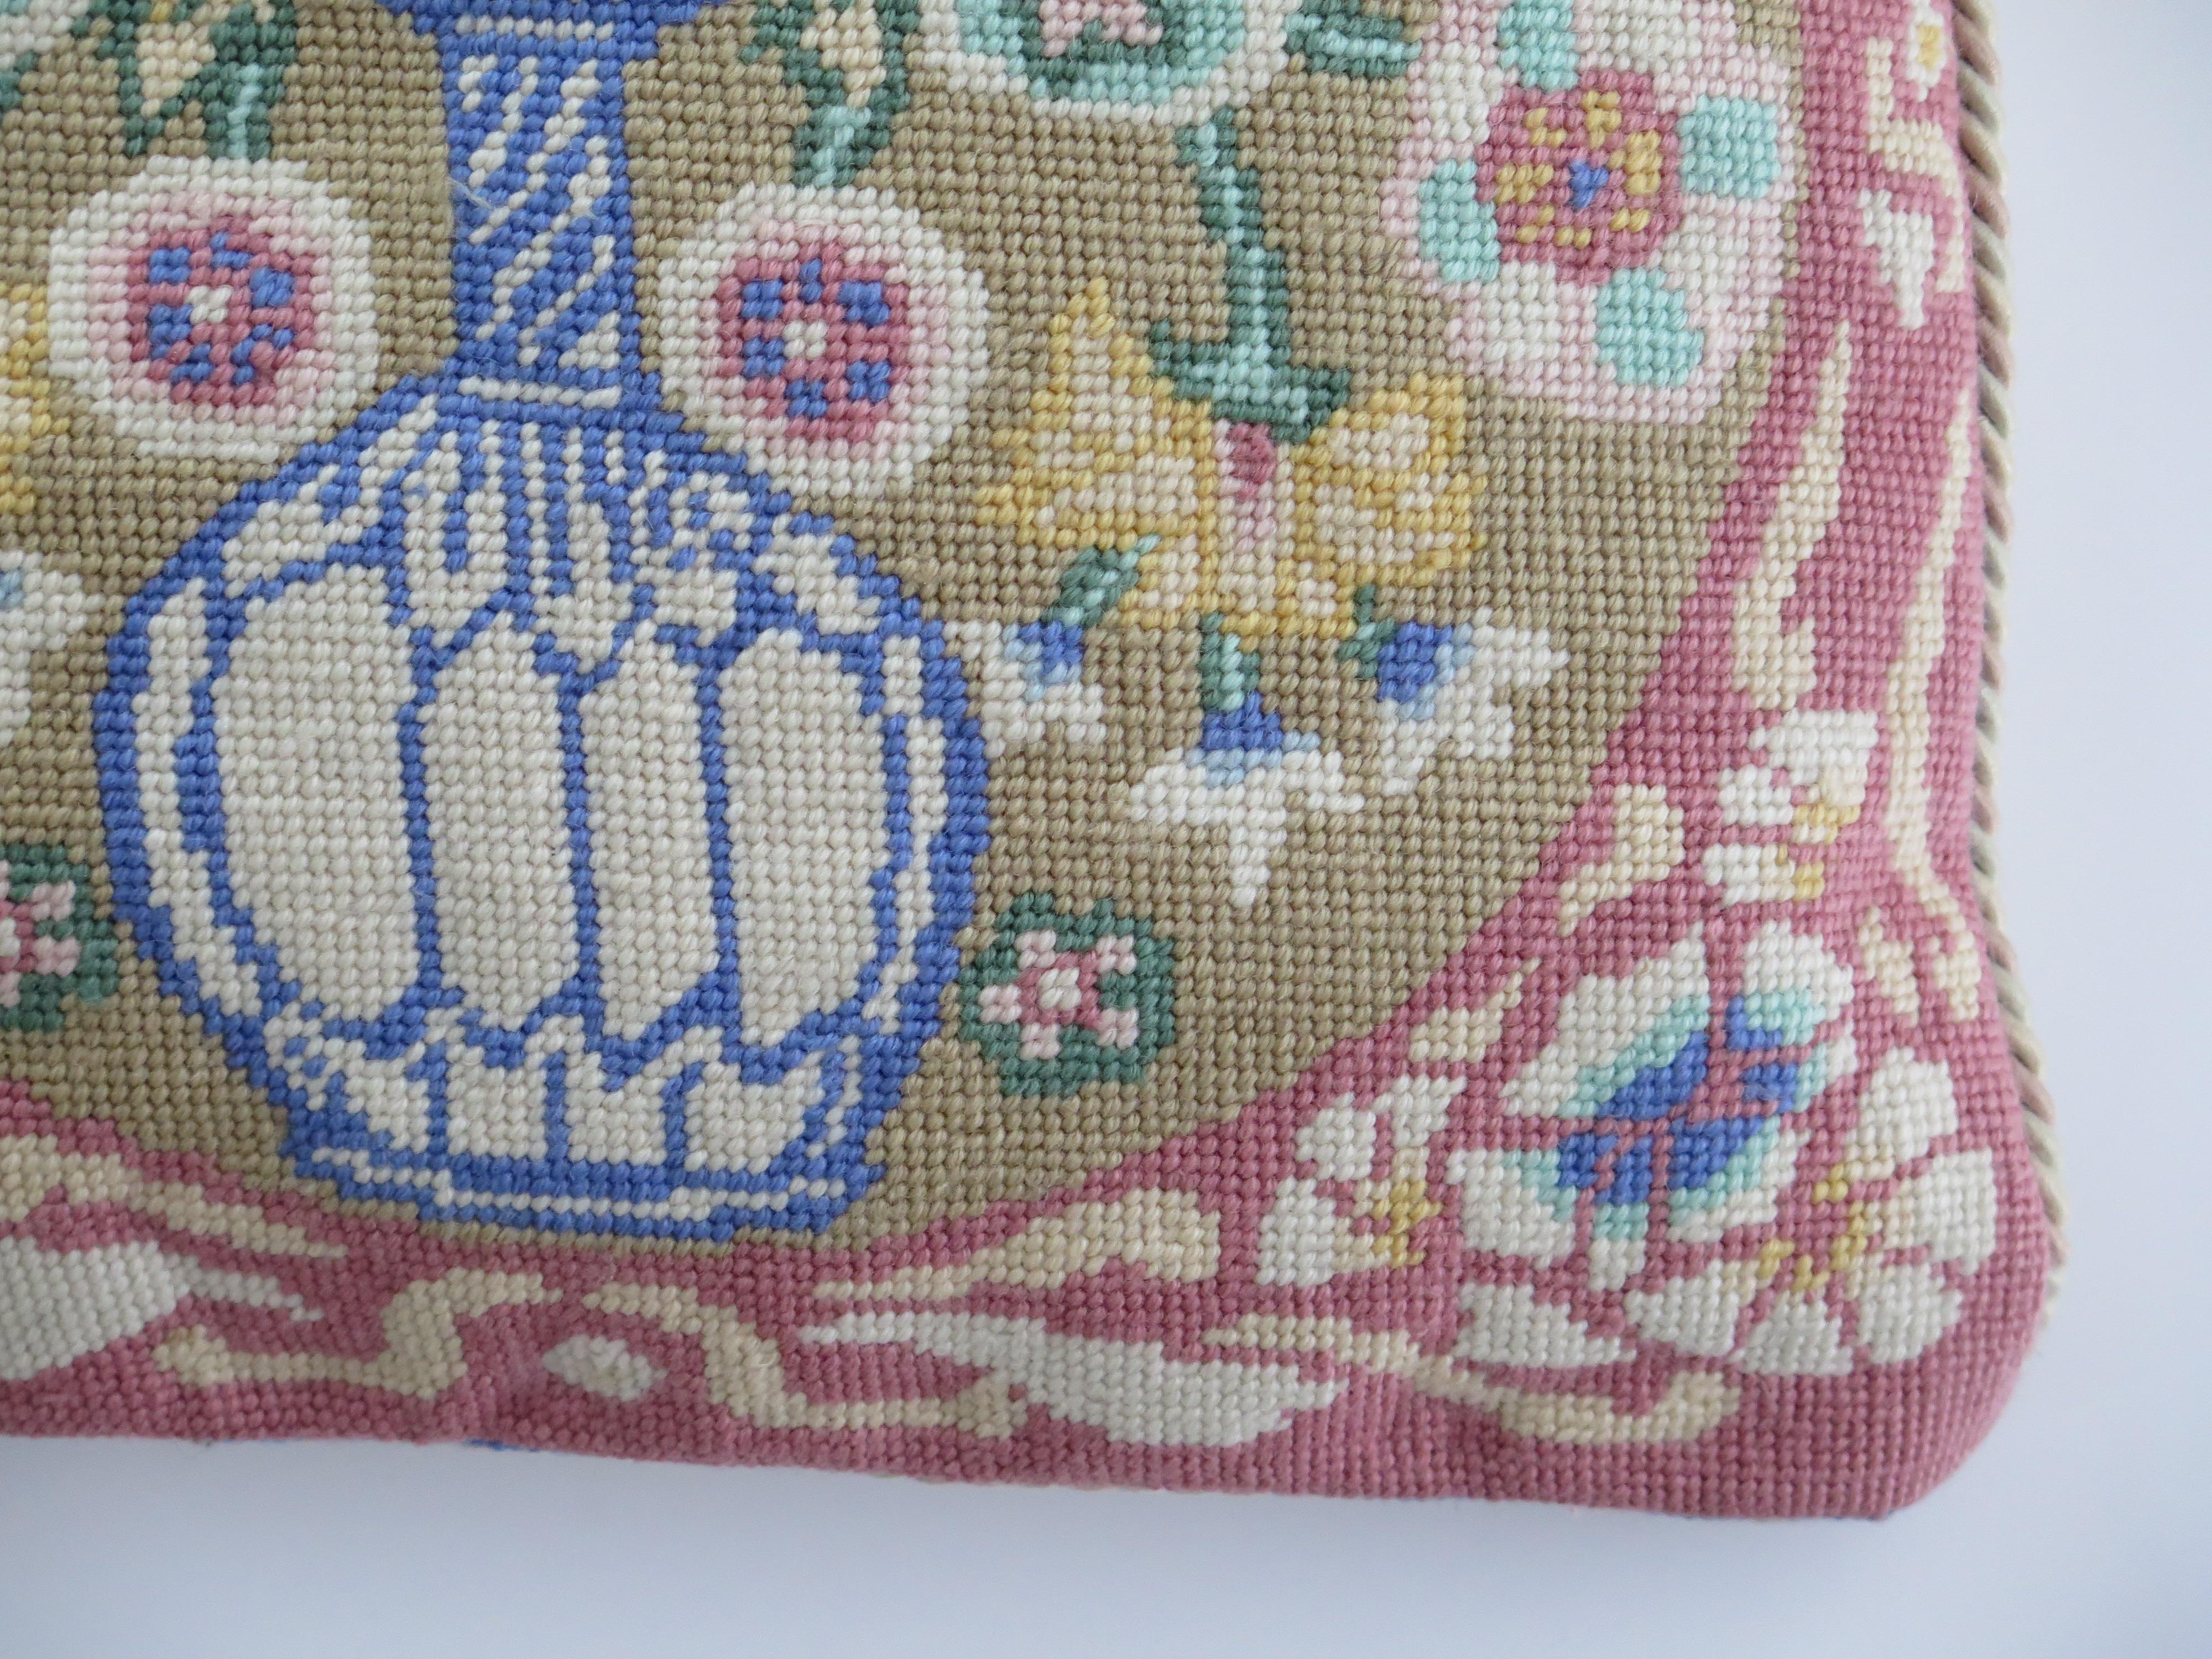 Woven Cushion or Pillow with Flower Vase pattern in pastel shades, Circa 1930s For Sale 1